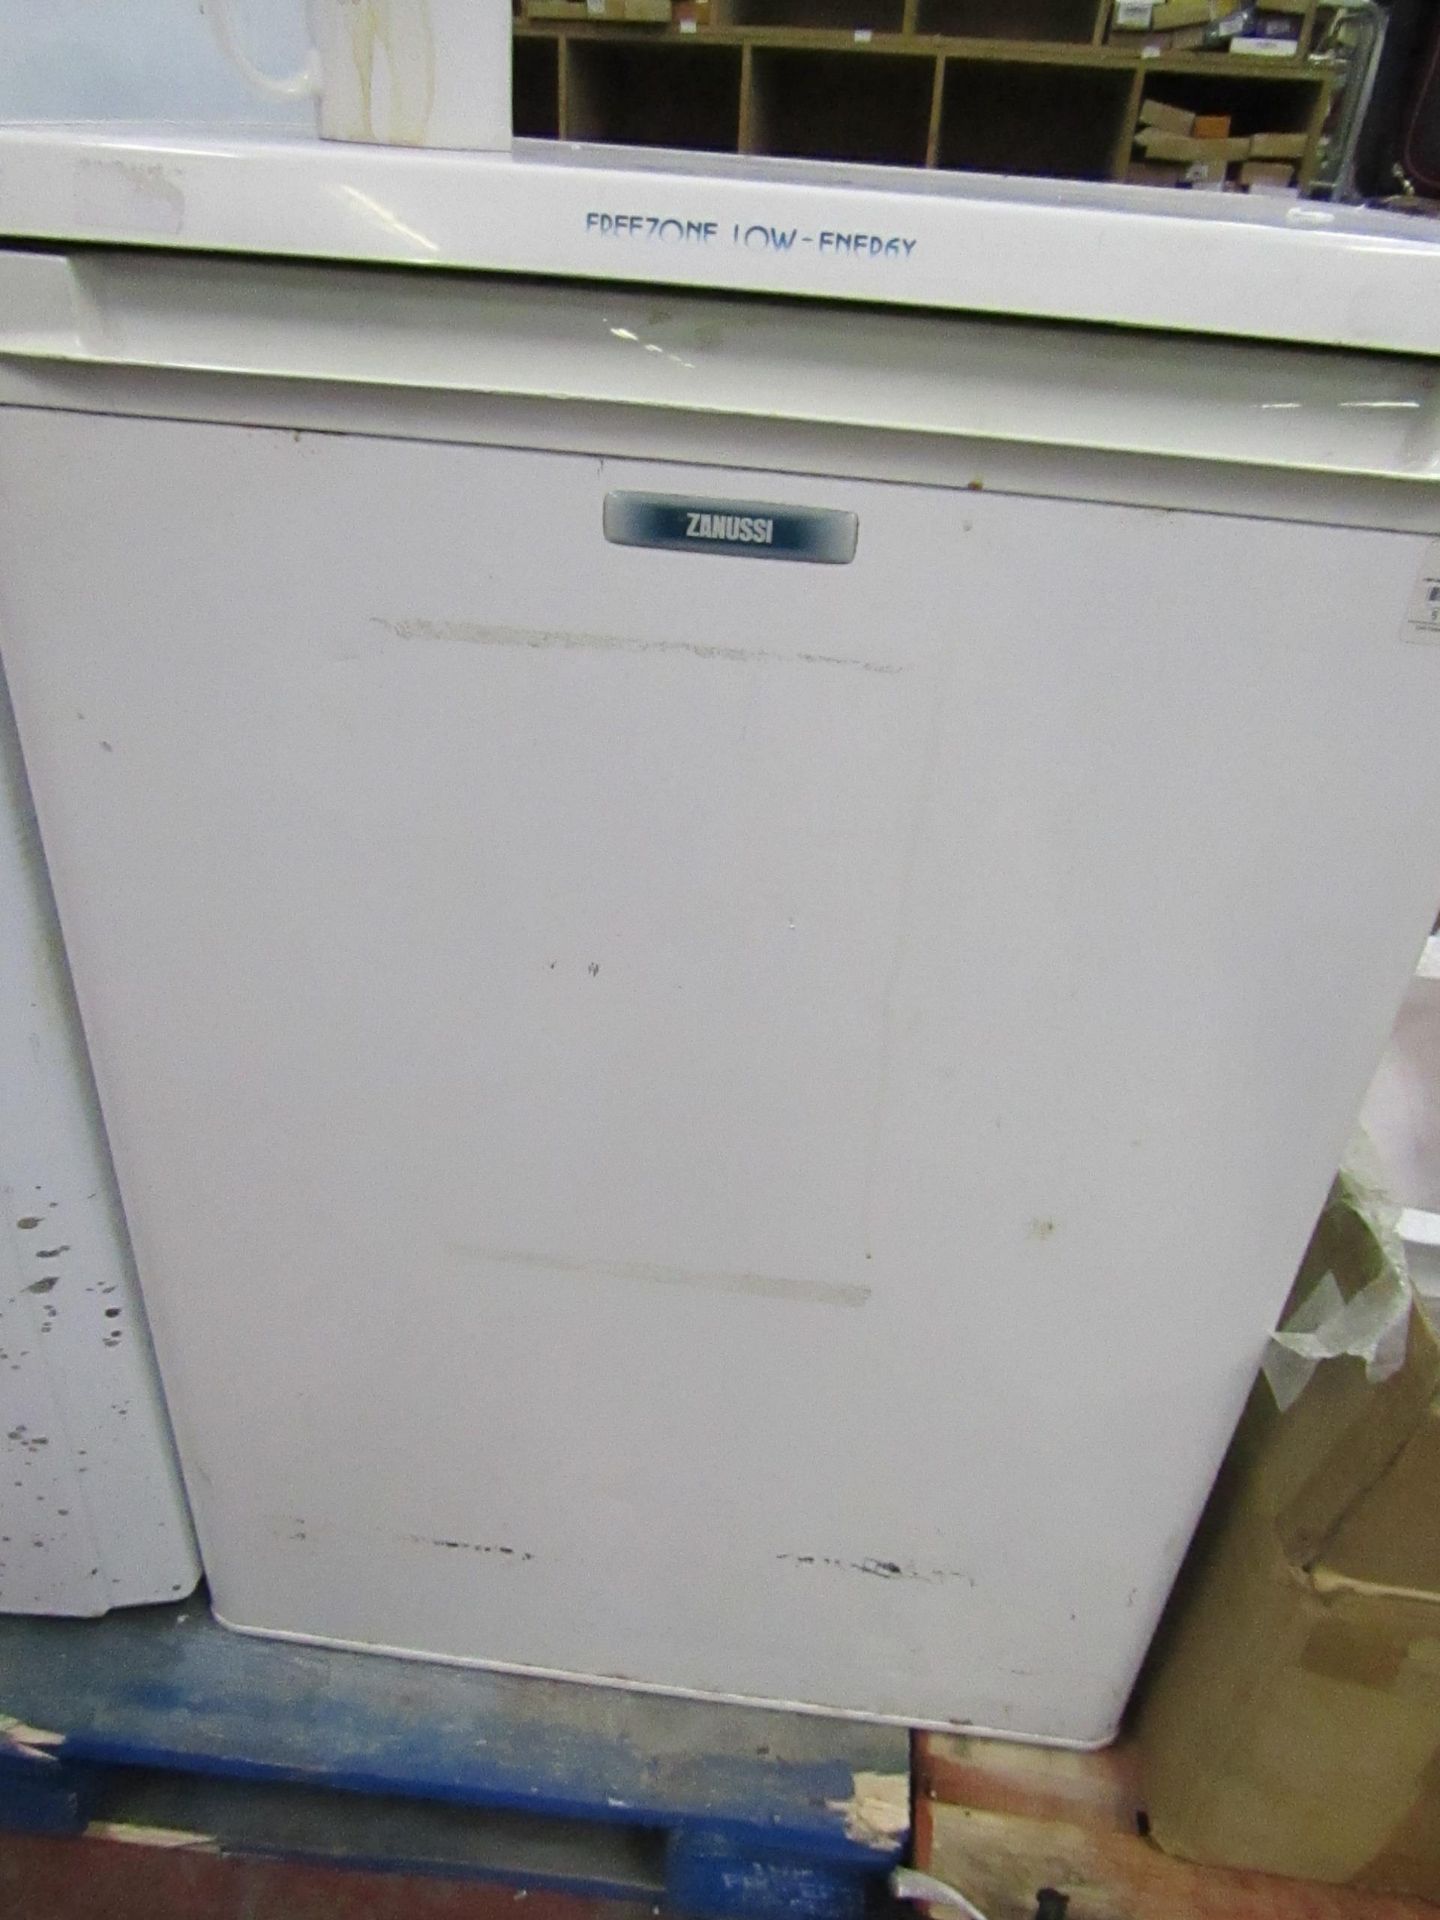 Zanussi Freezone Low Energy Fridge needs a serious clean unchecked